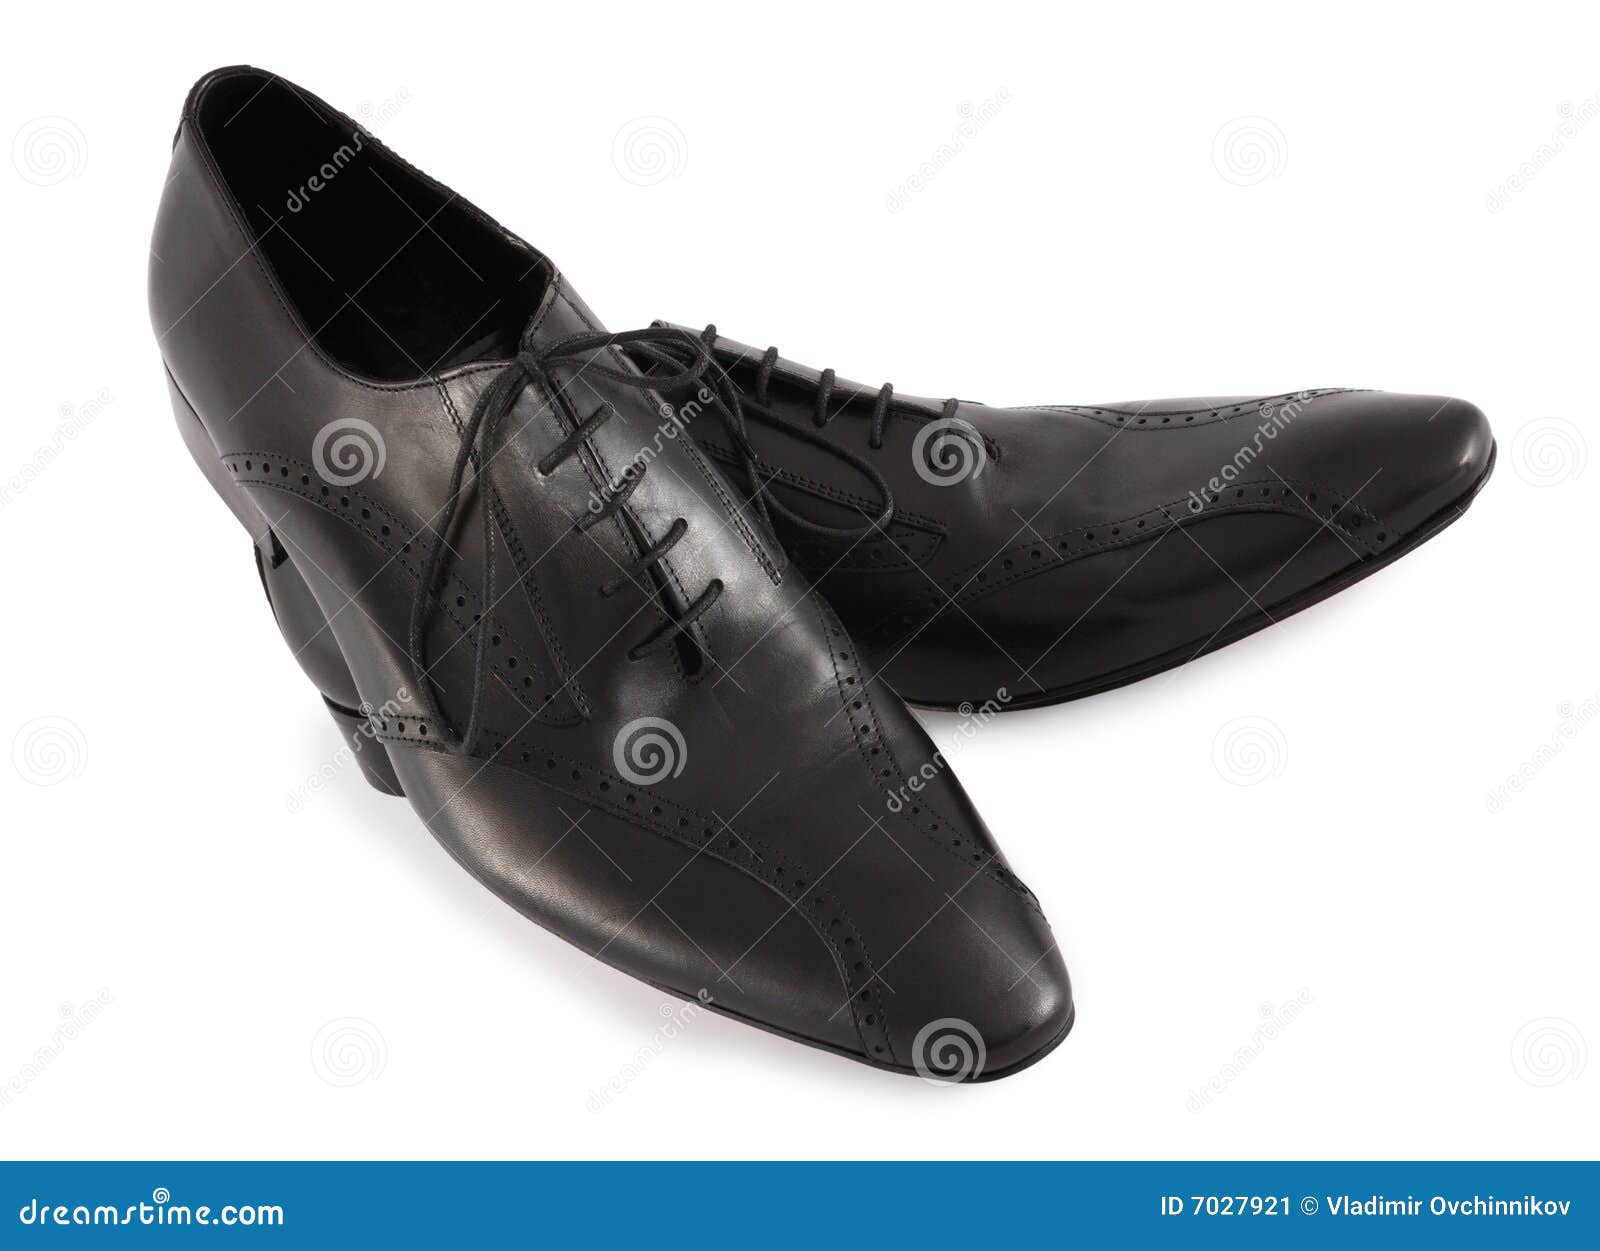 Modern Mens Shoes Stock Image - Image: 7027921